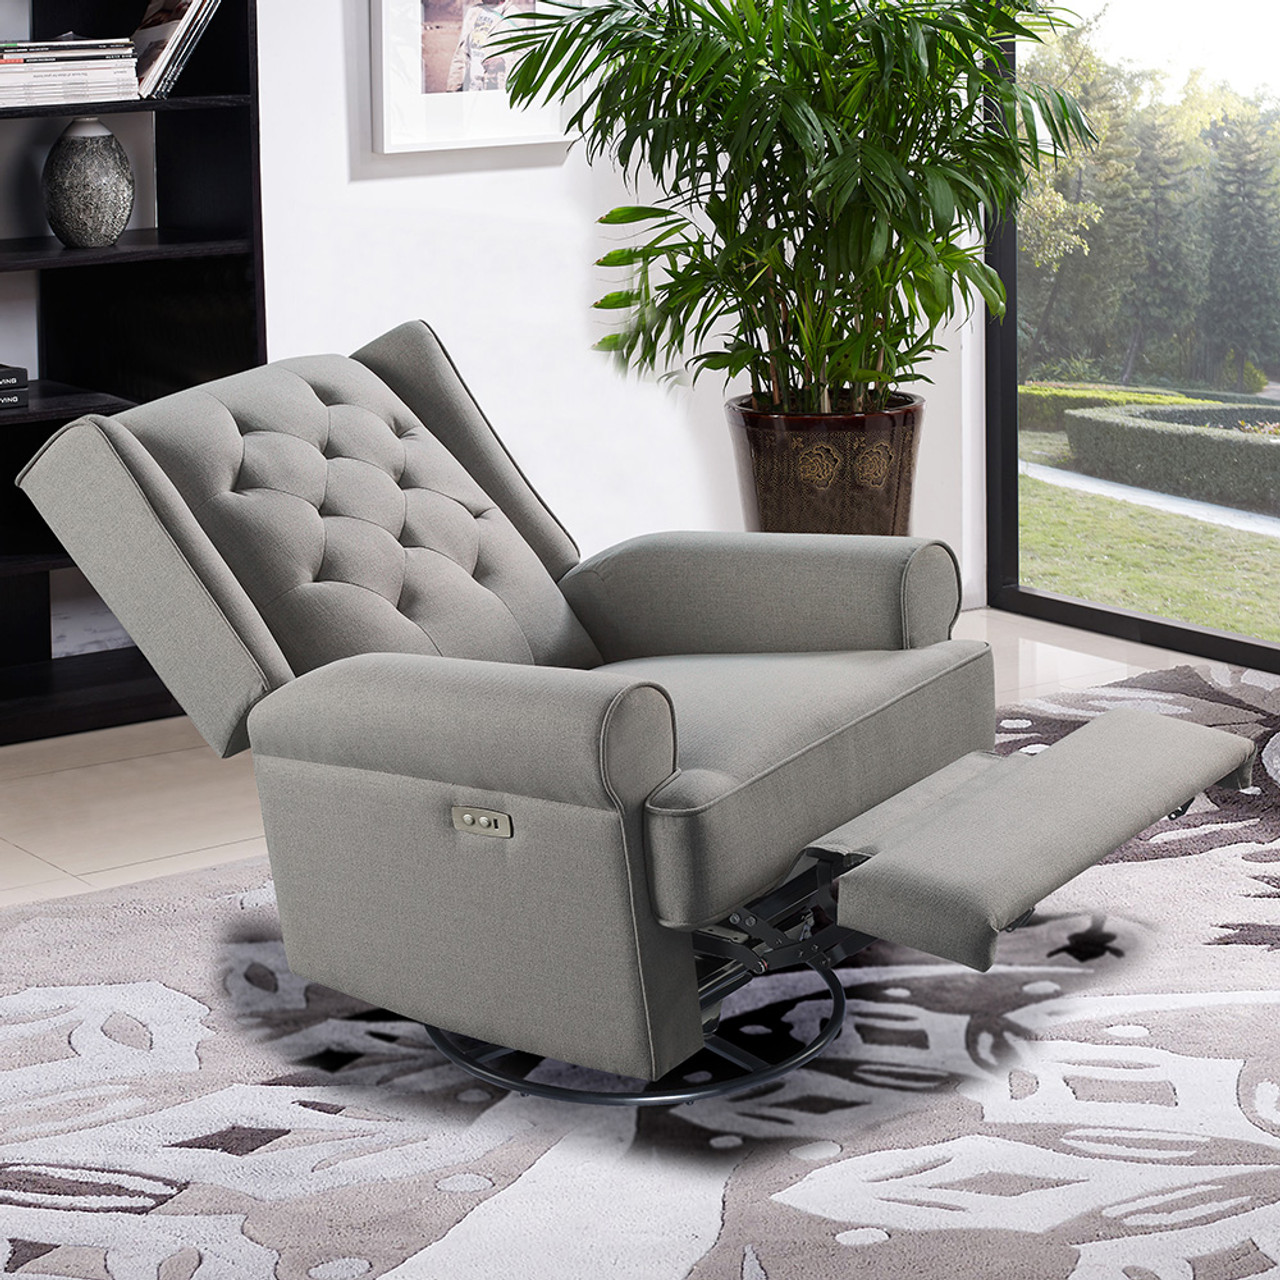 Westwood Amelia Power Swivel, Glider, Recliner with USB Ports in